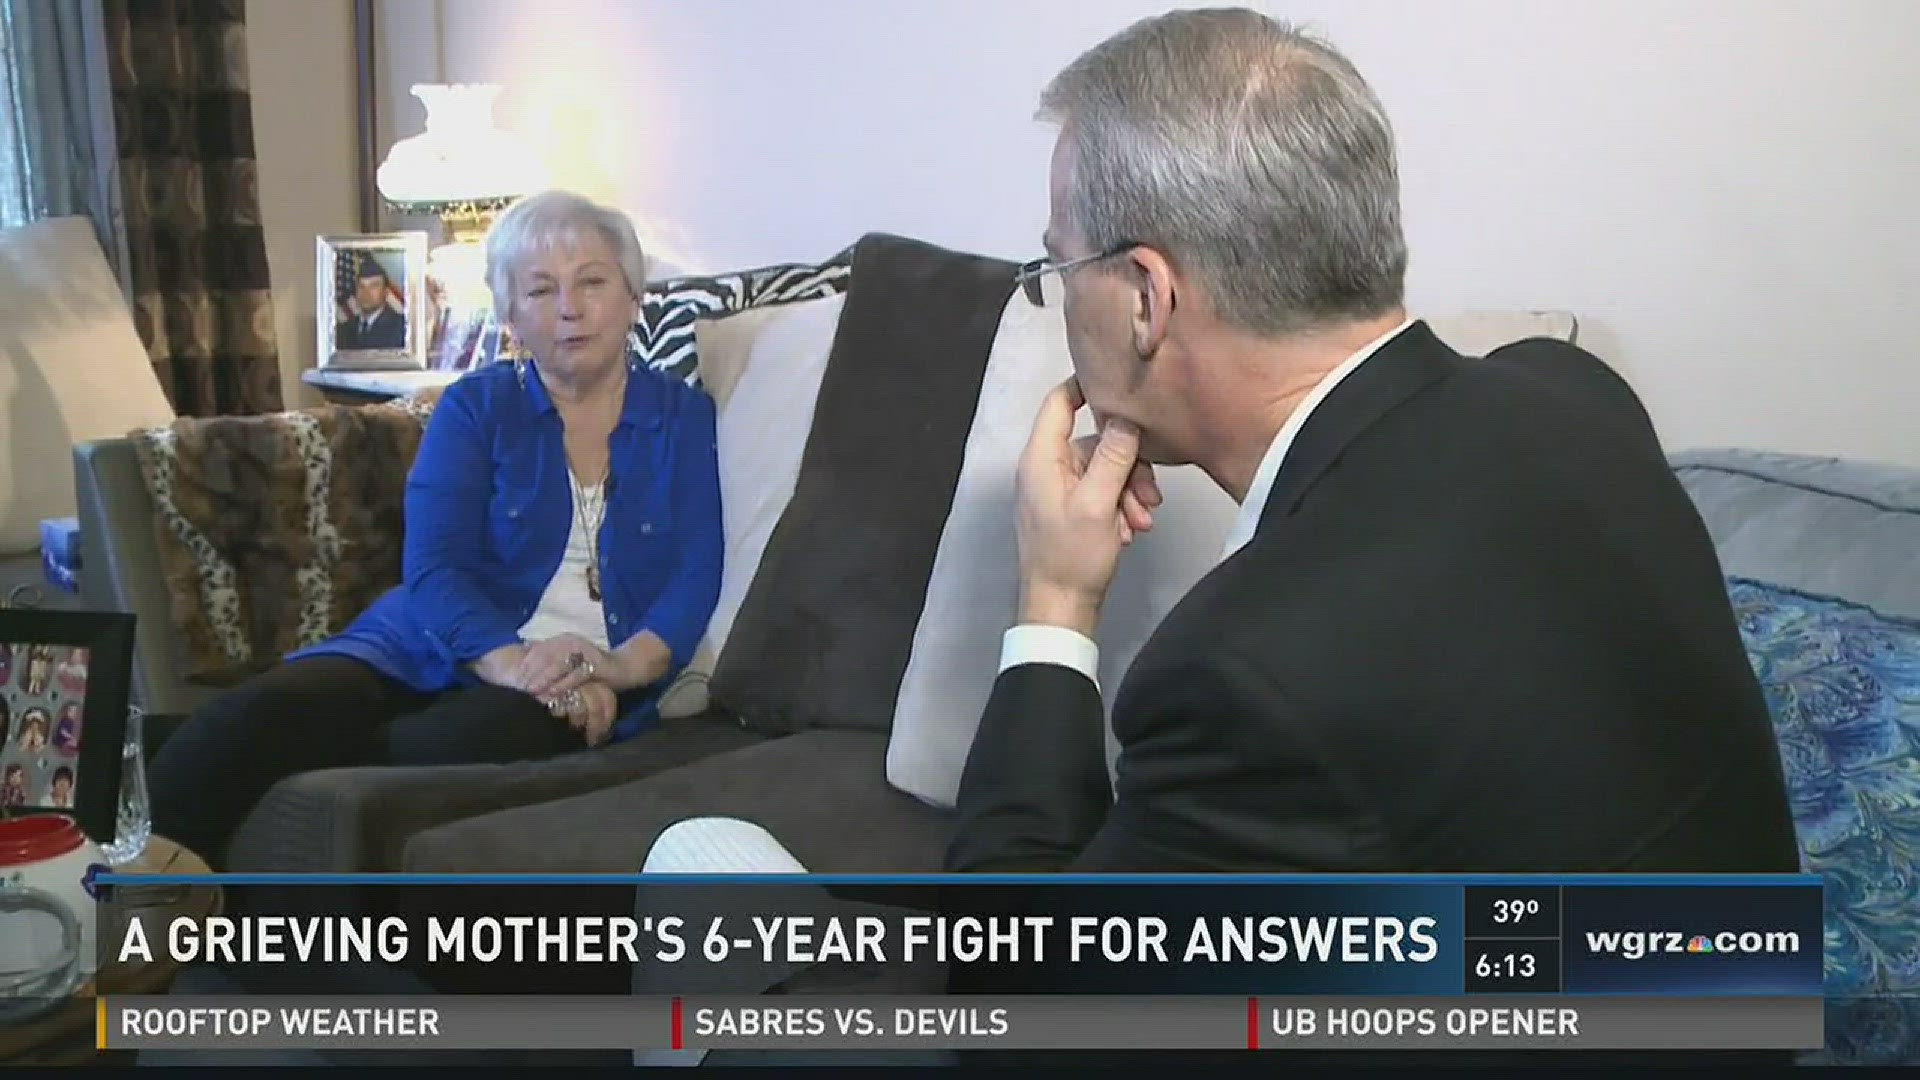 A Grieving Mother's 6-Year Fight For Answers